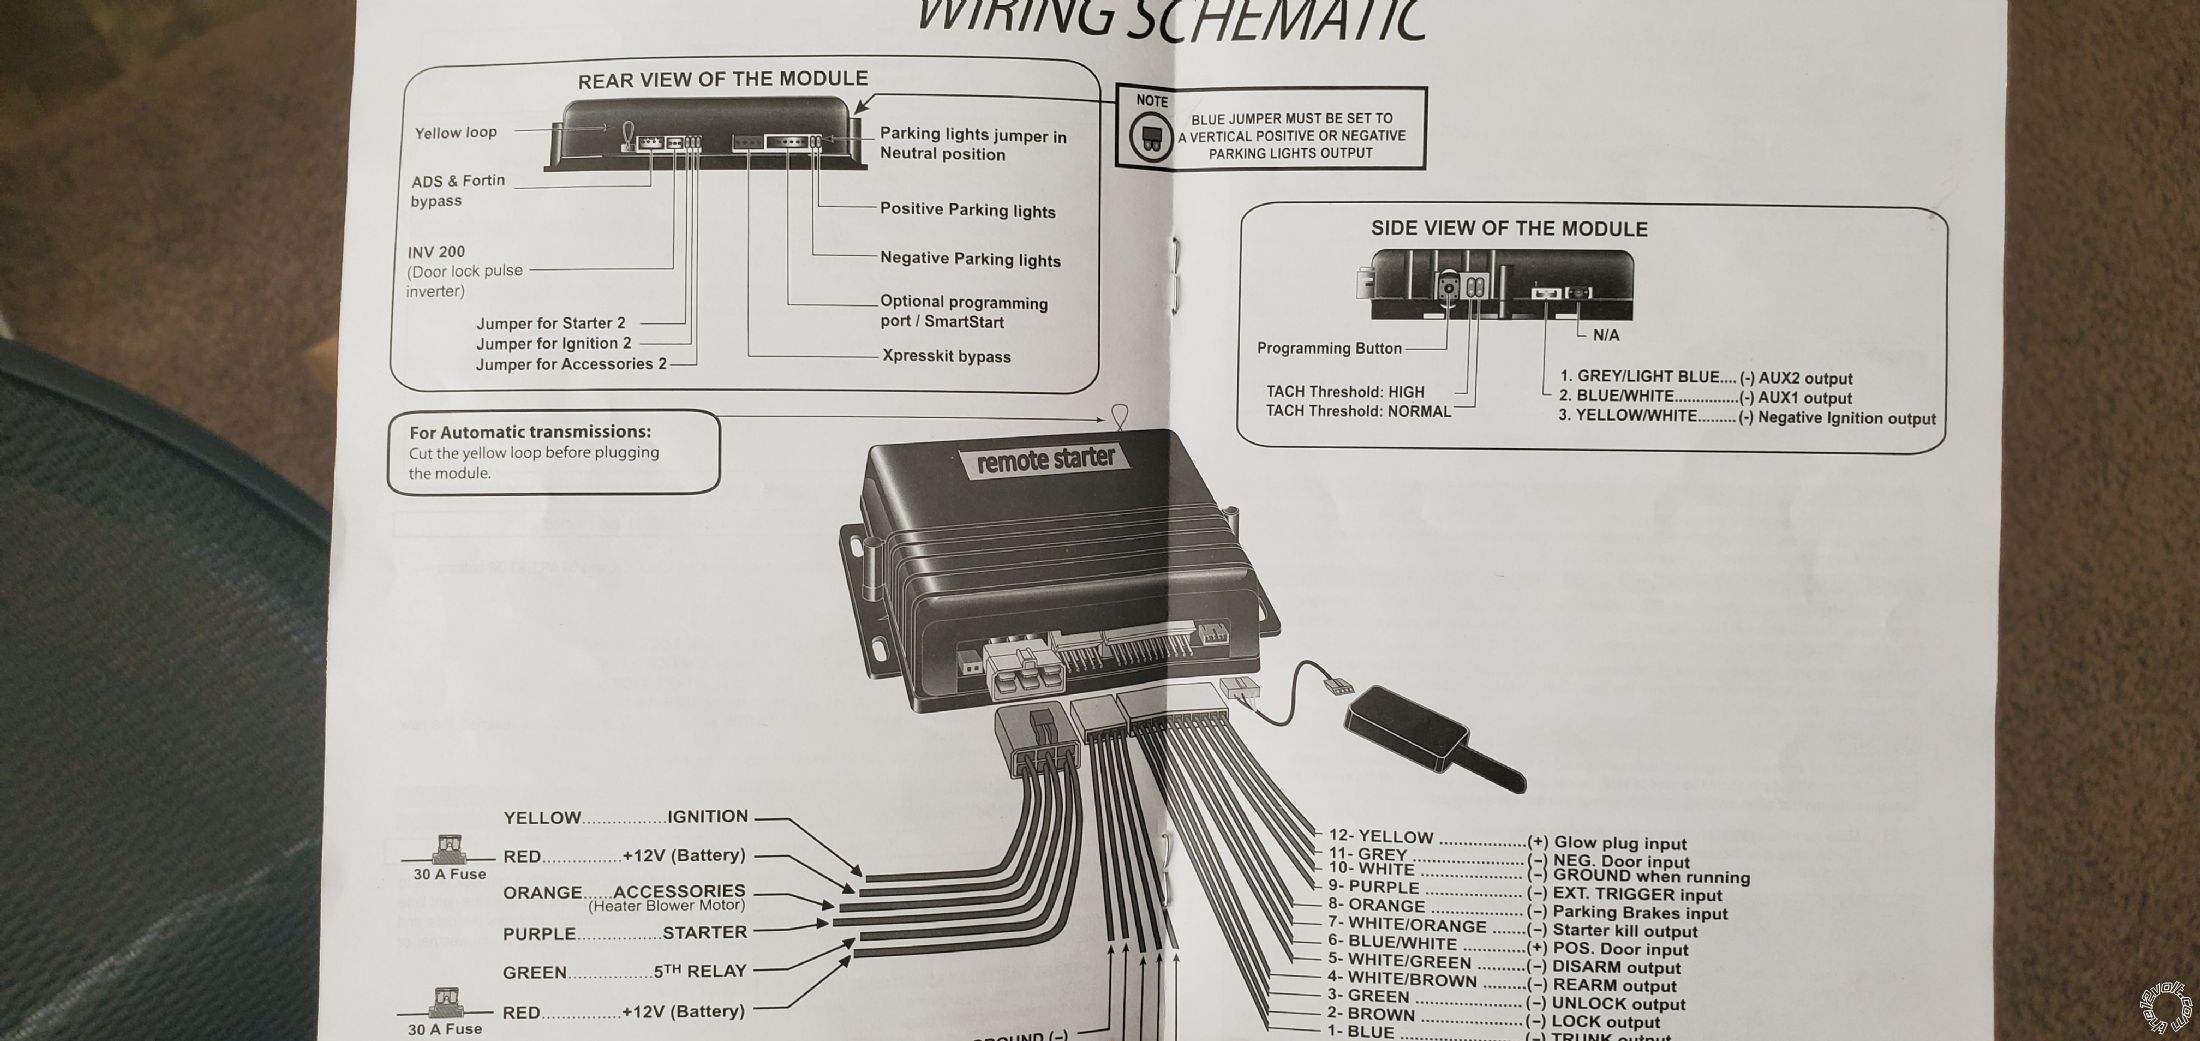 BMW E39 Remote Starter Wiring Confusion -- posted image.